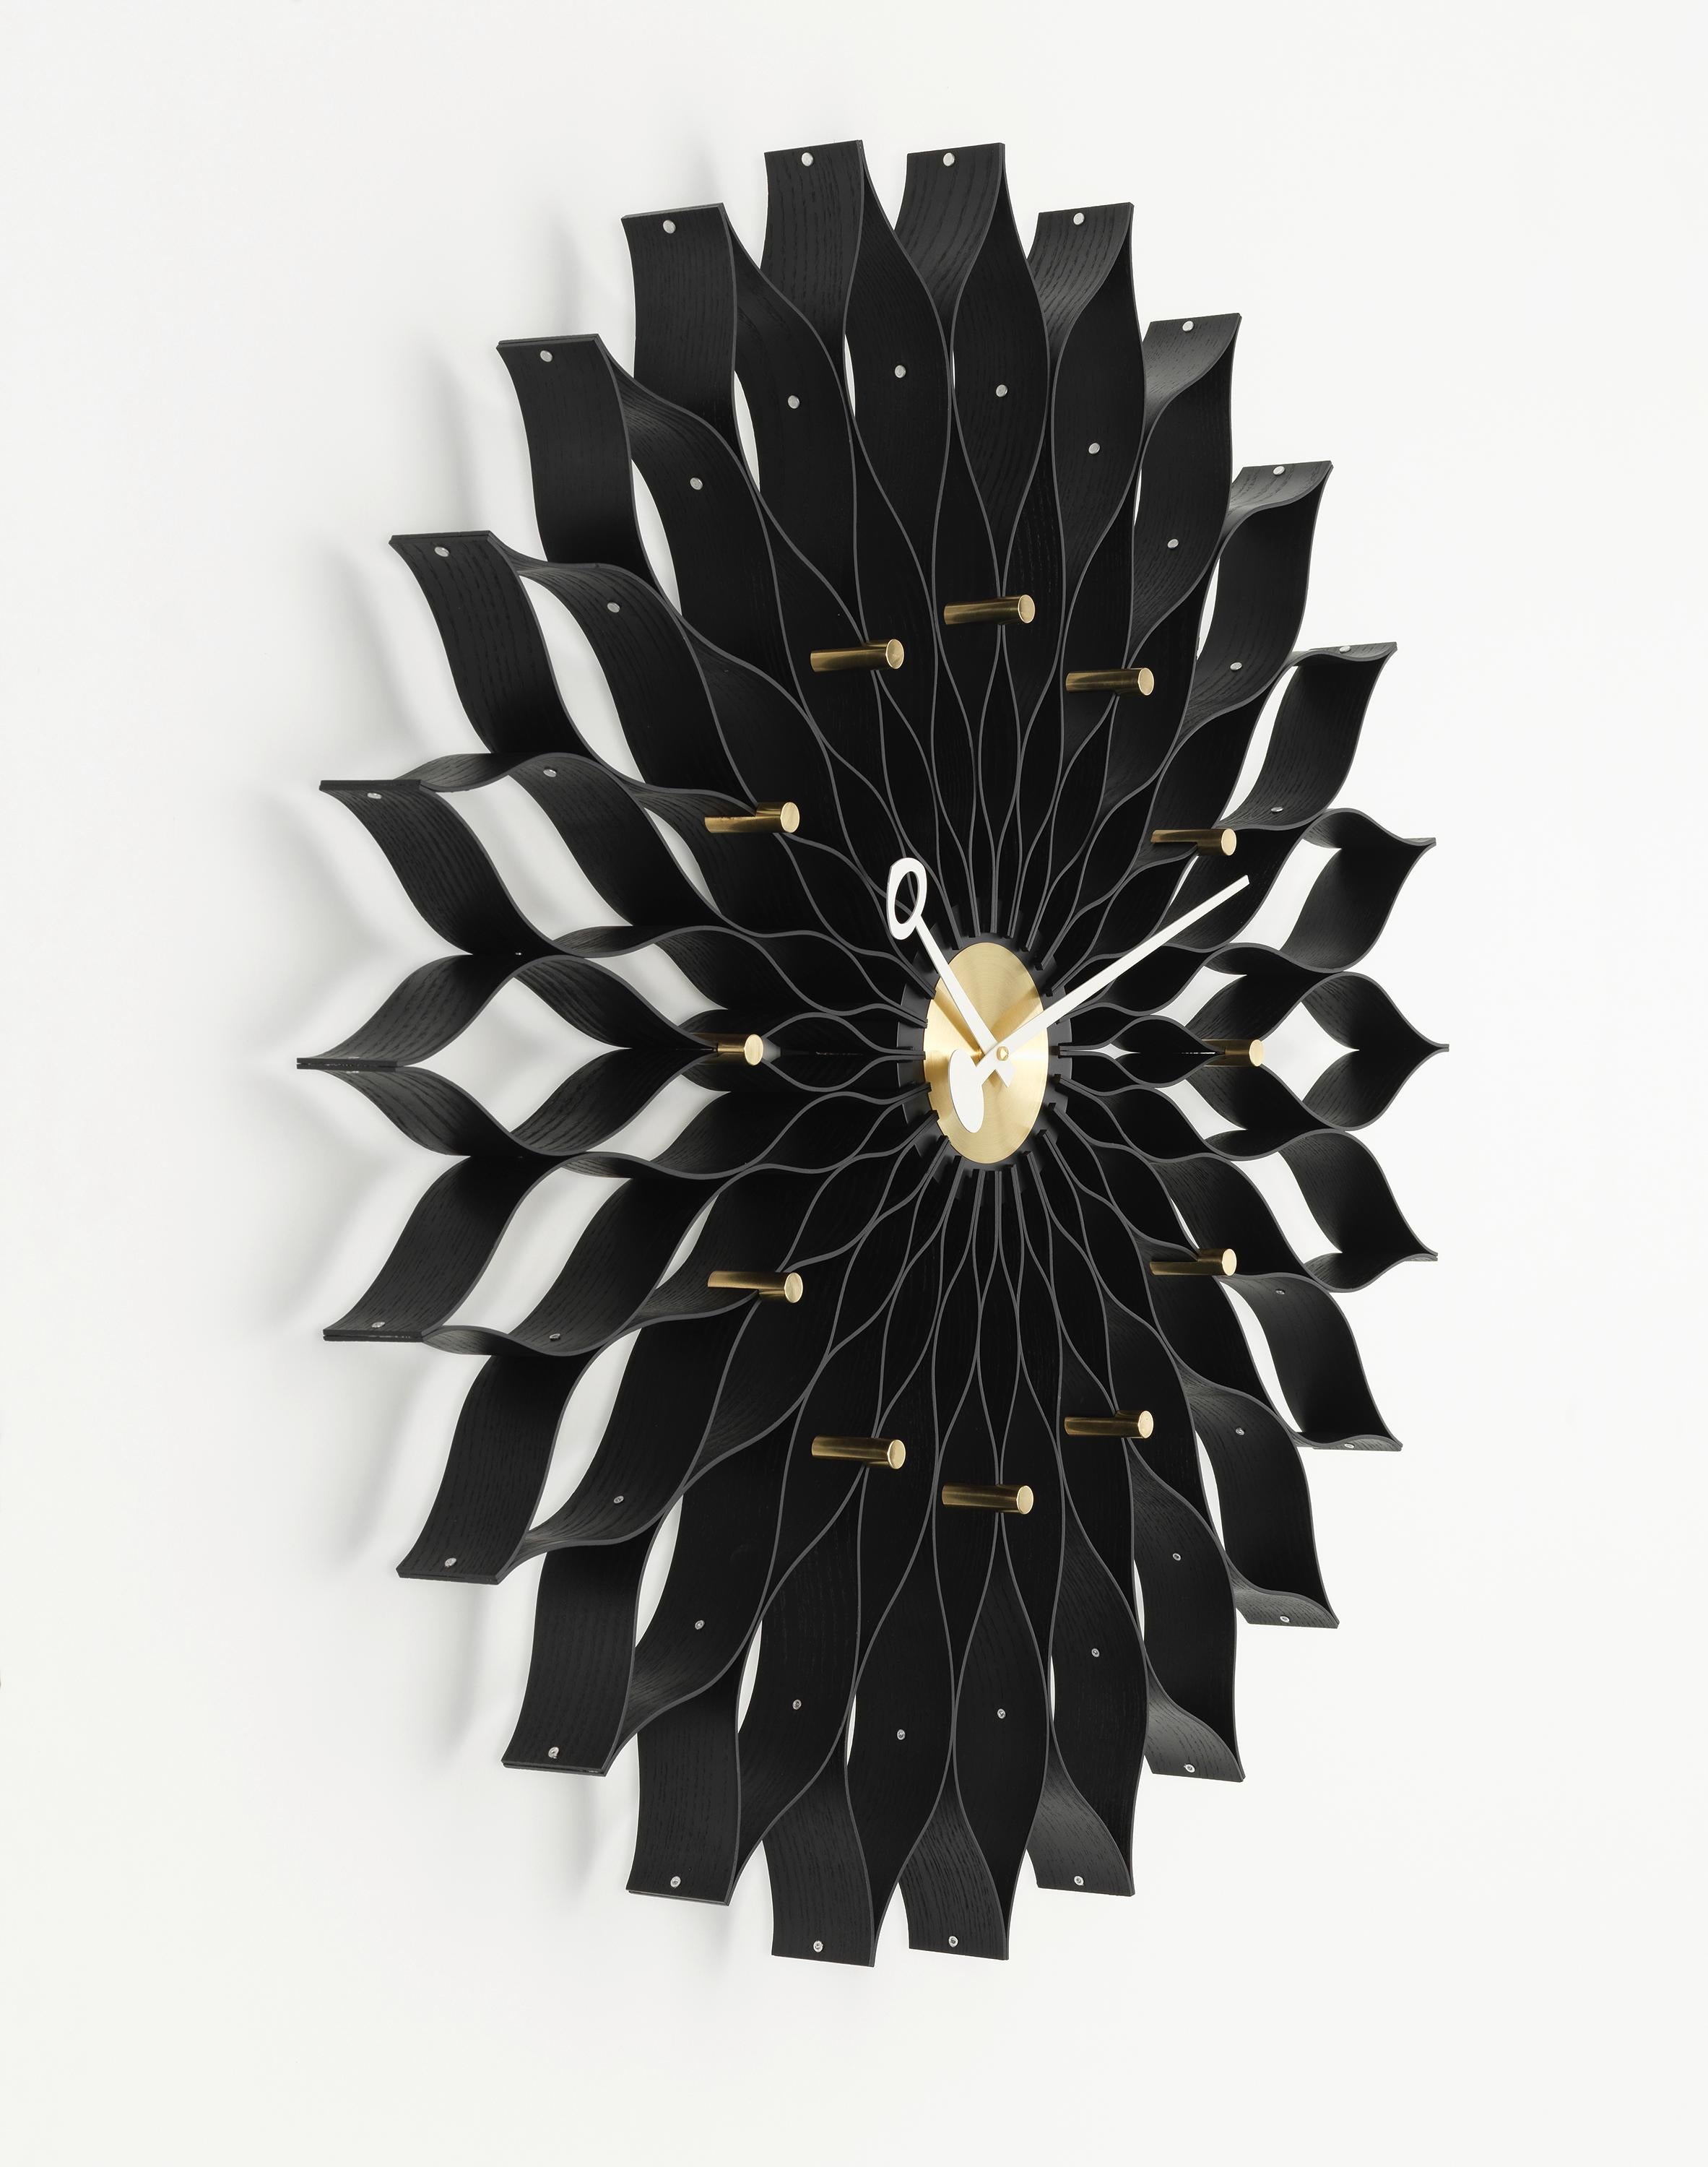 Vitra Sunflower Clock in Black Ash & Brass by George Nelson In New Condition For Sale In New York, NY